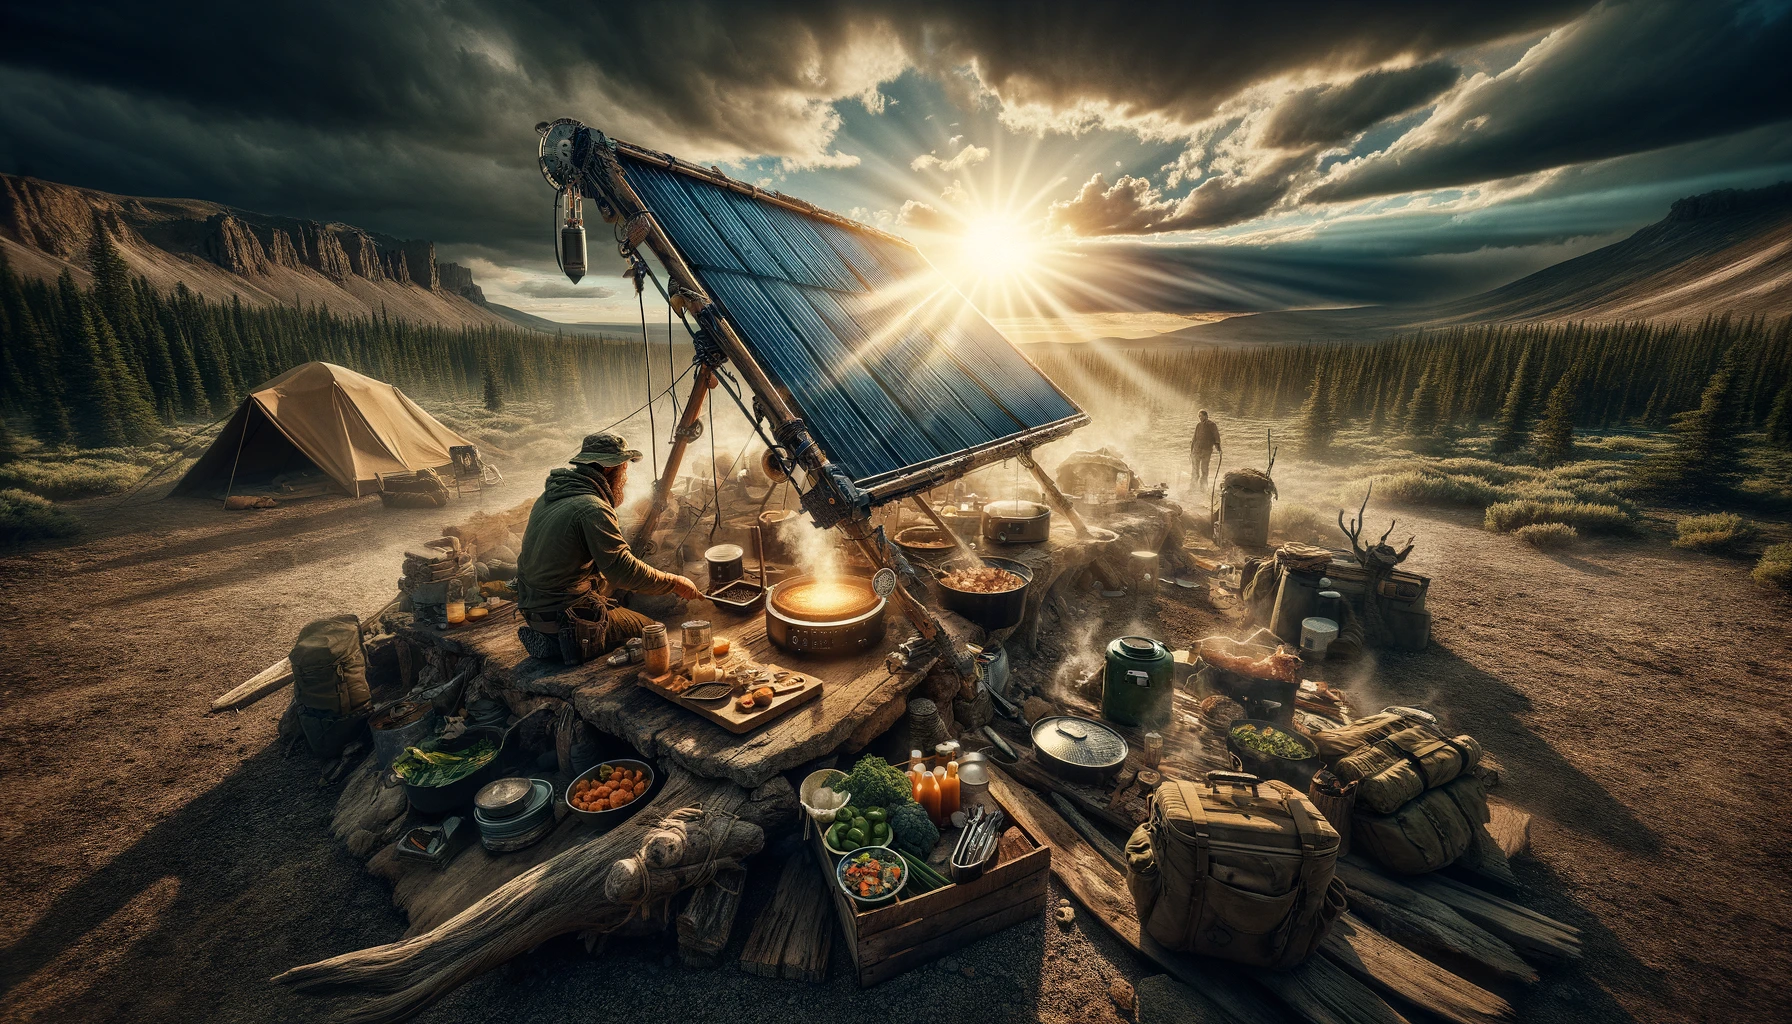 Expansive, desolate landscape with a DIY solar cooker made from repurposed materials, surrounded by survivors using homemade tools and foraged ingredients, under a dramatic sky, showcasing resilience, innovation, and community in survival cooking